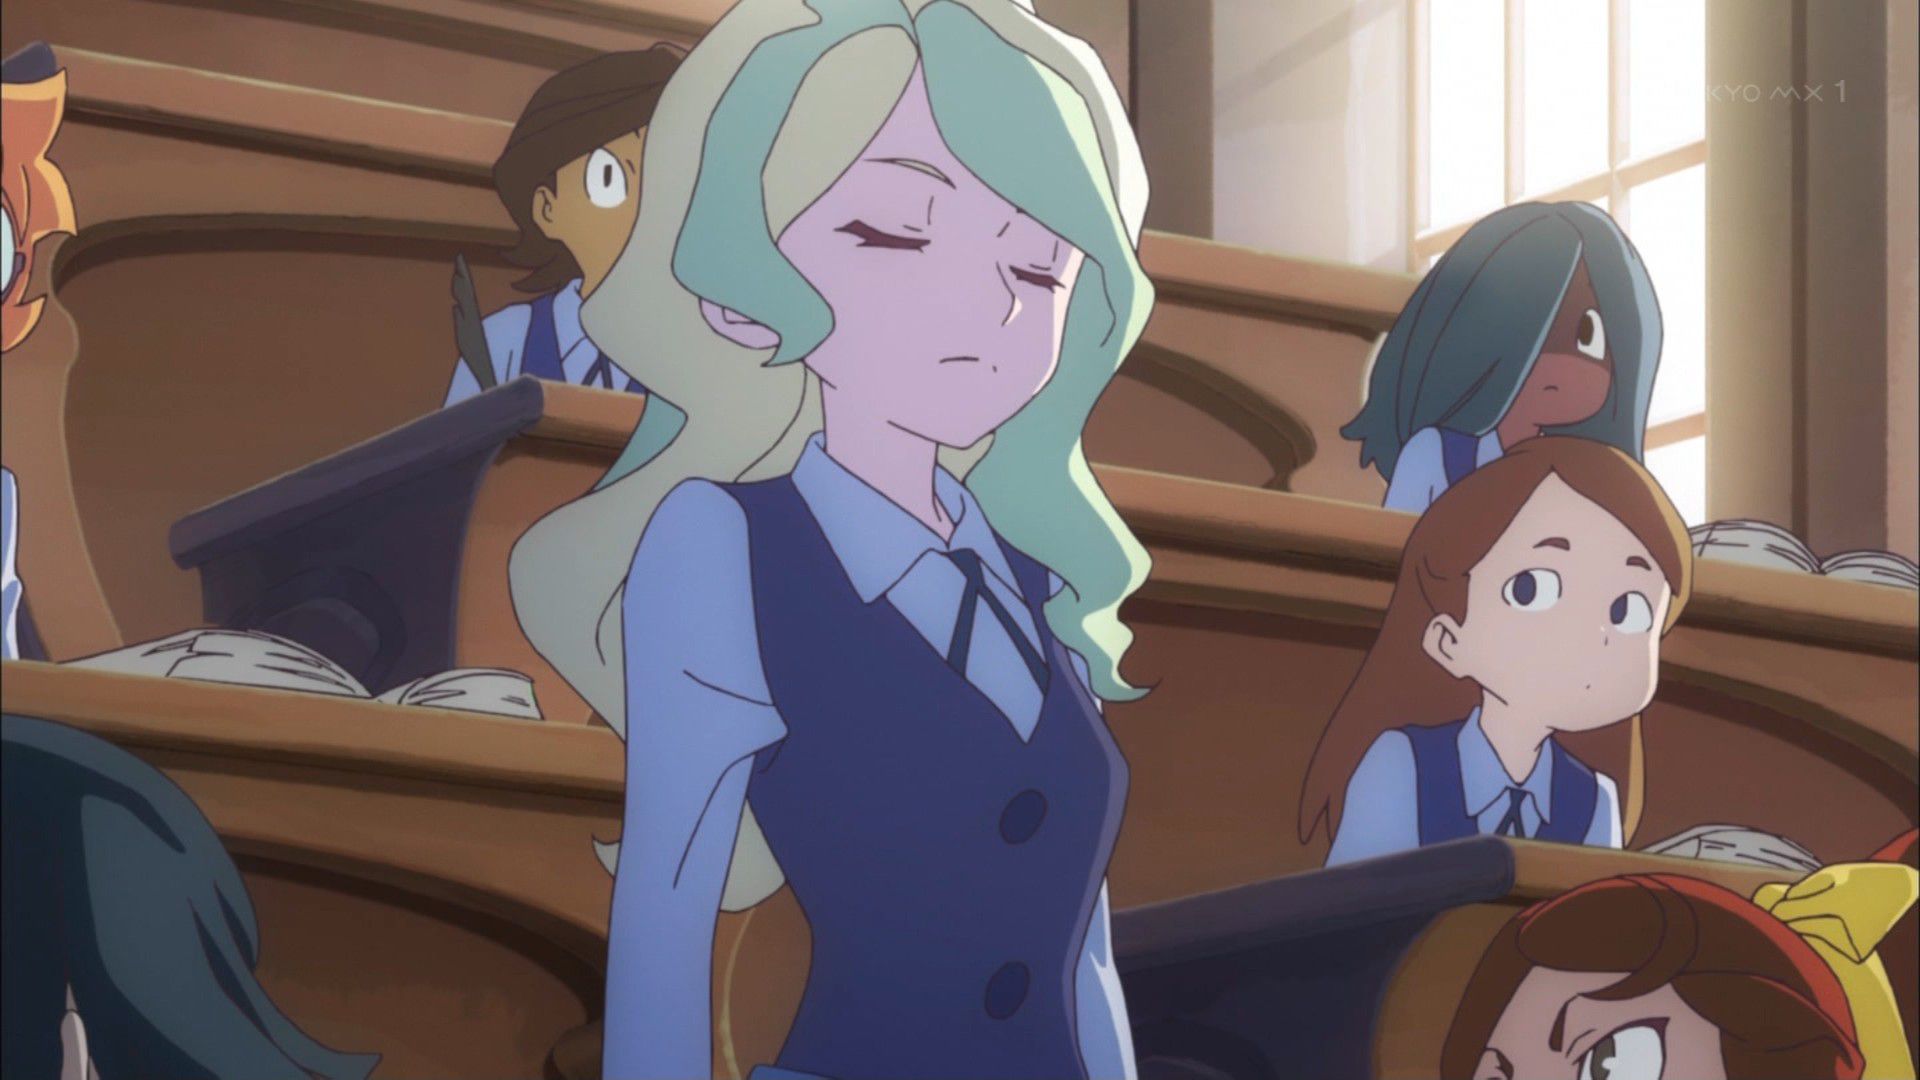 And want to show "little witch academia's story, children cartoons! 10